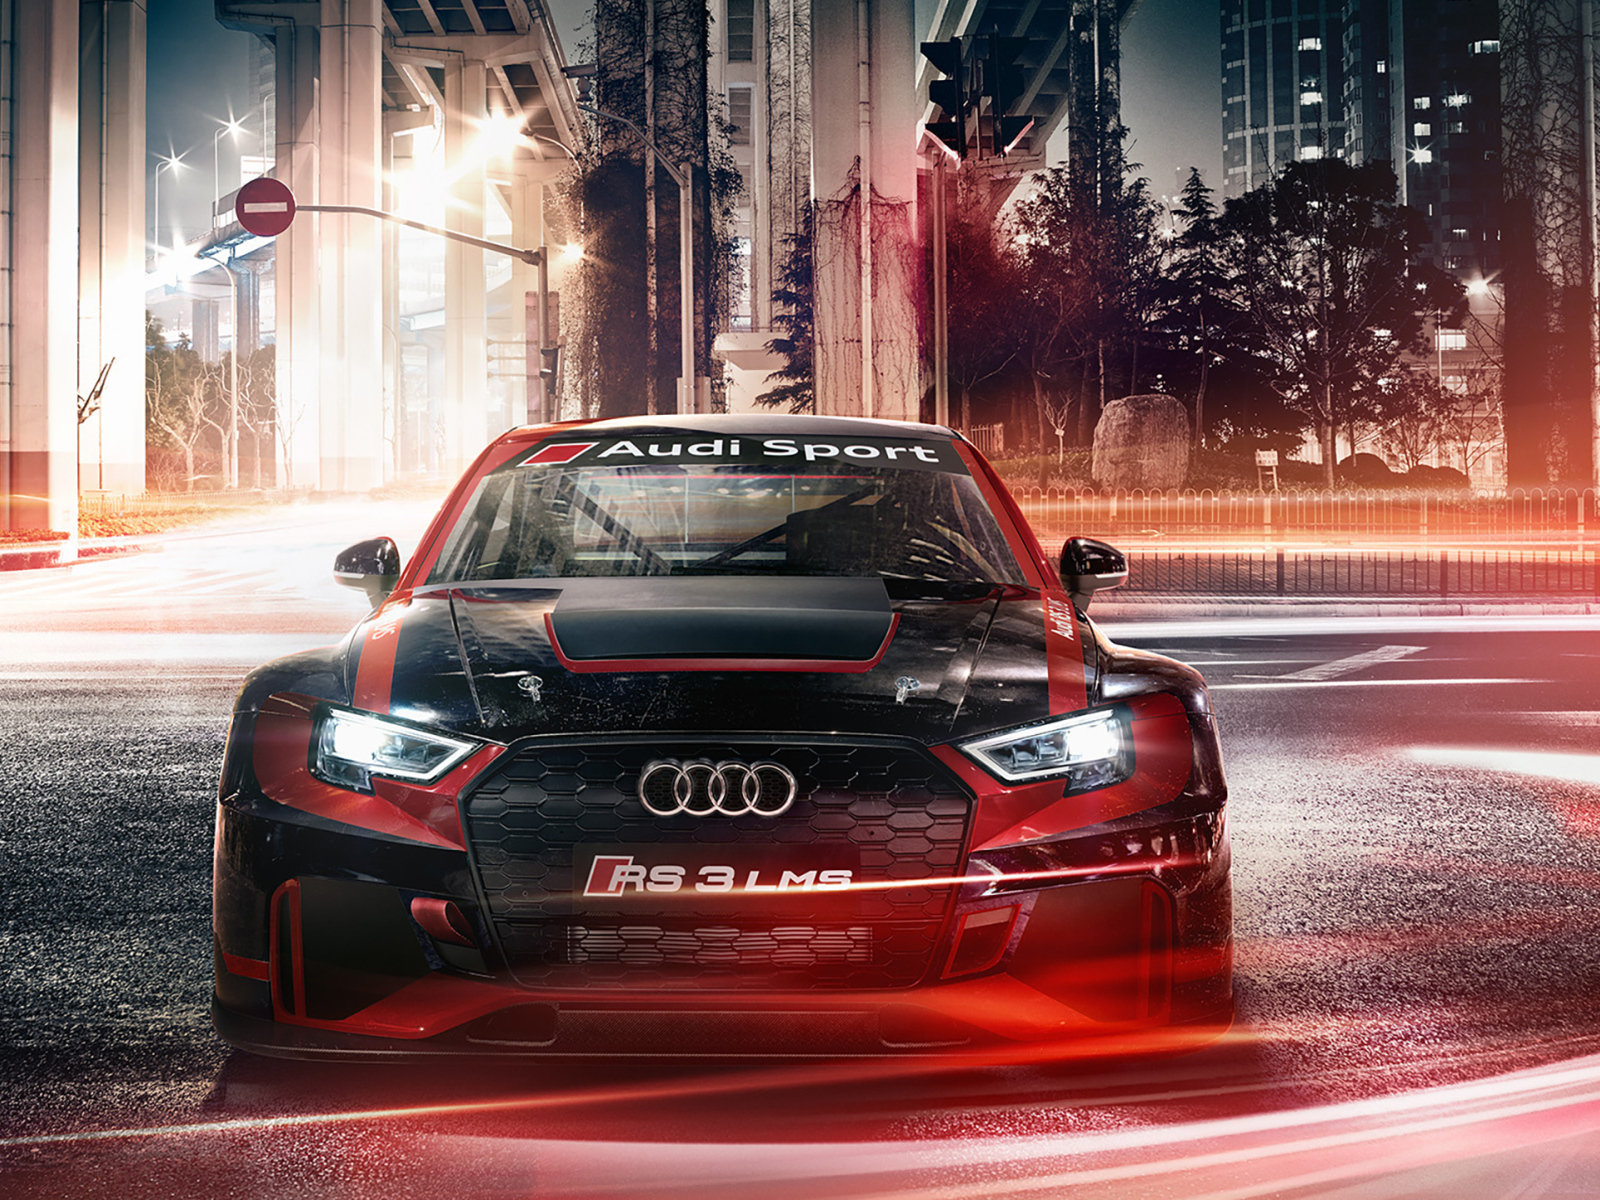 Audi RS 3 LMS sports car in the street